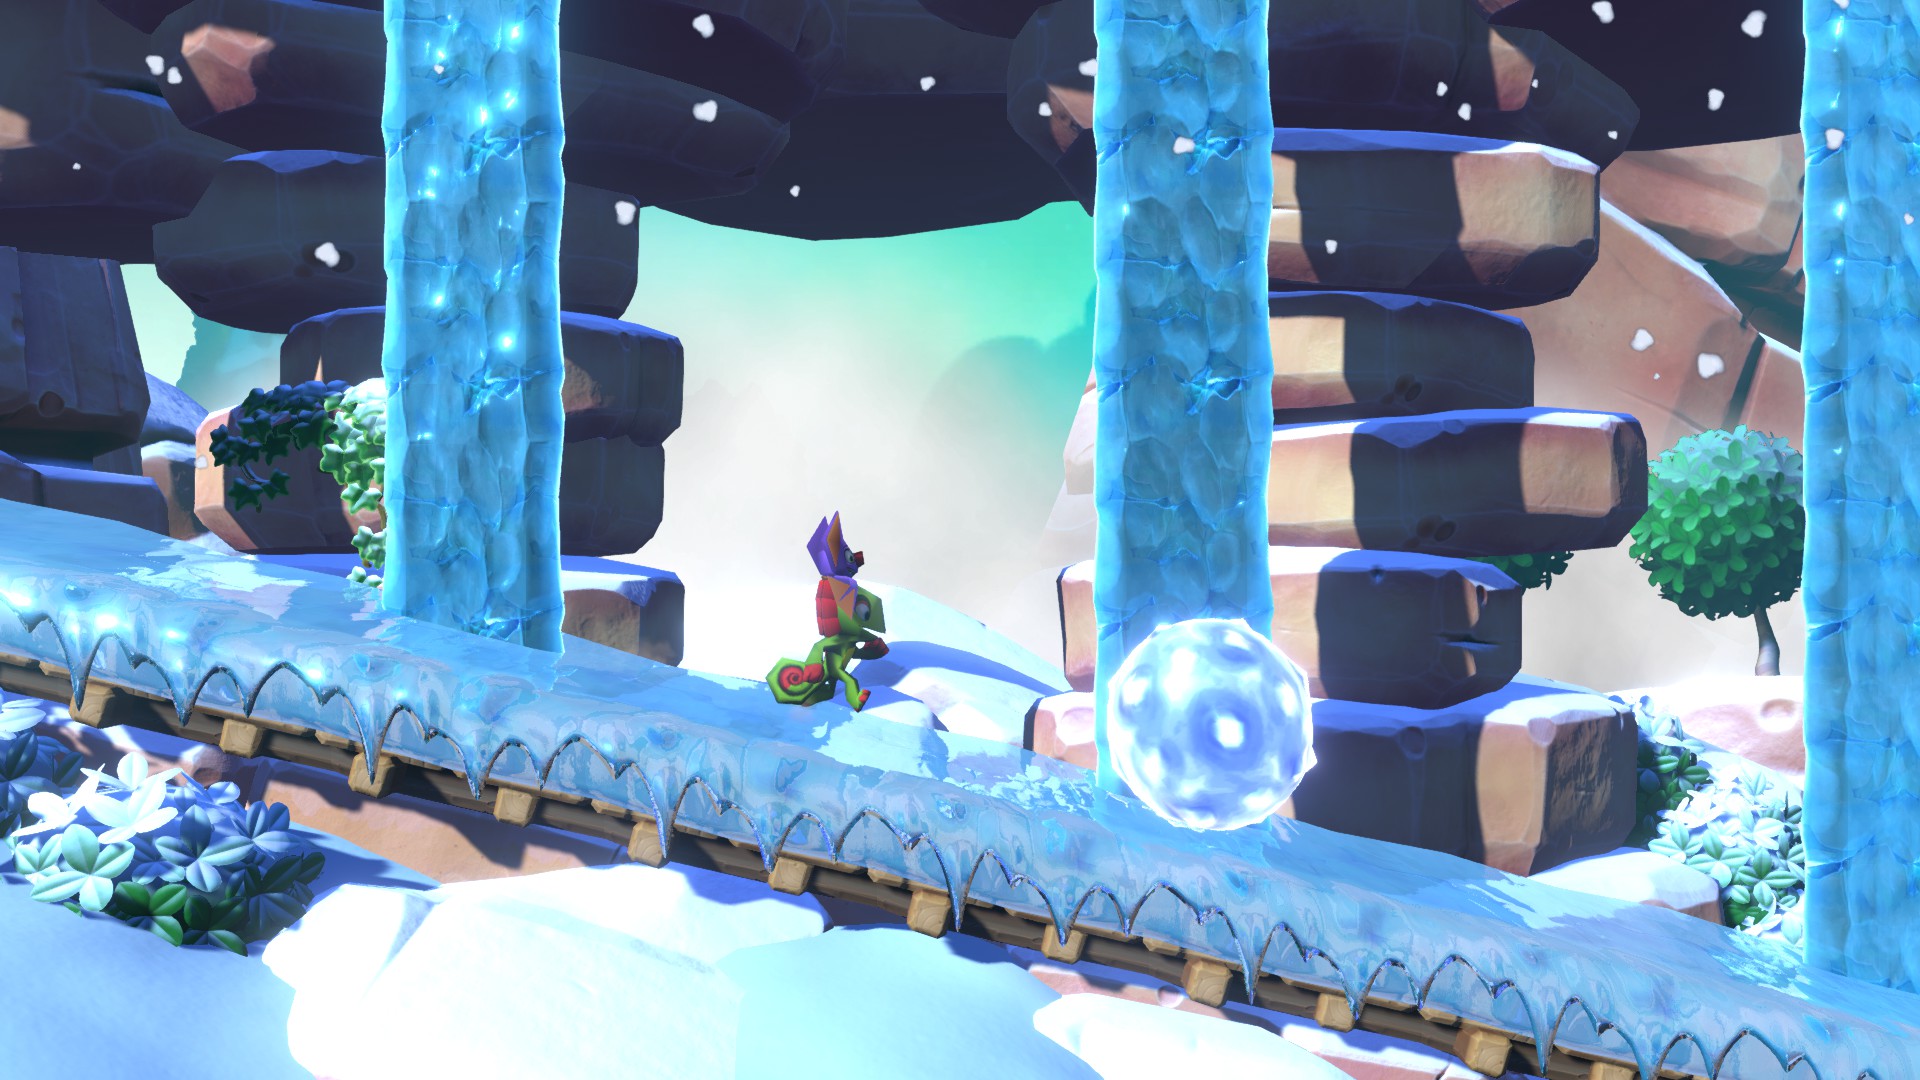 Yooka-Laylee and the Impossible Lair - screenshot 3